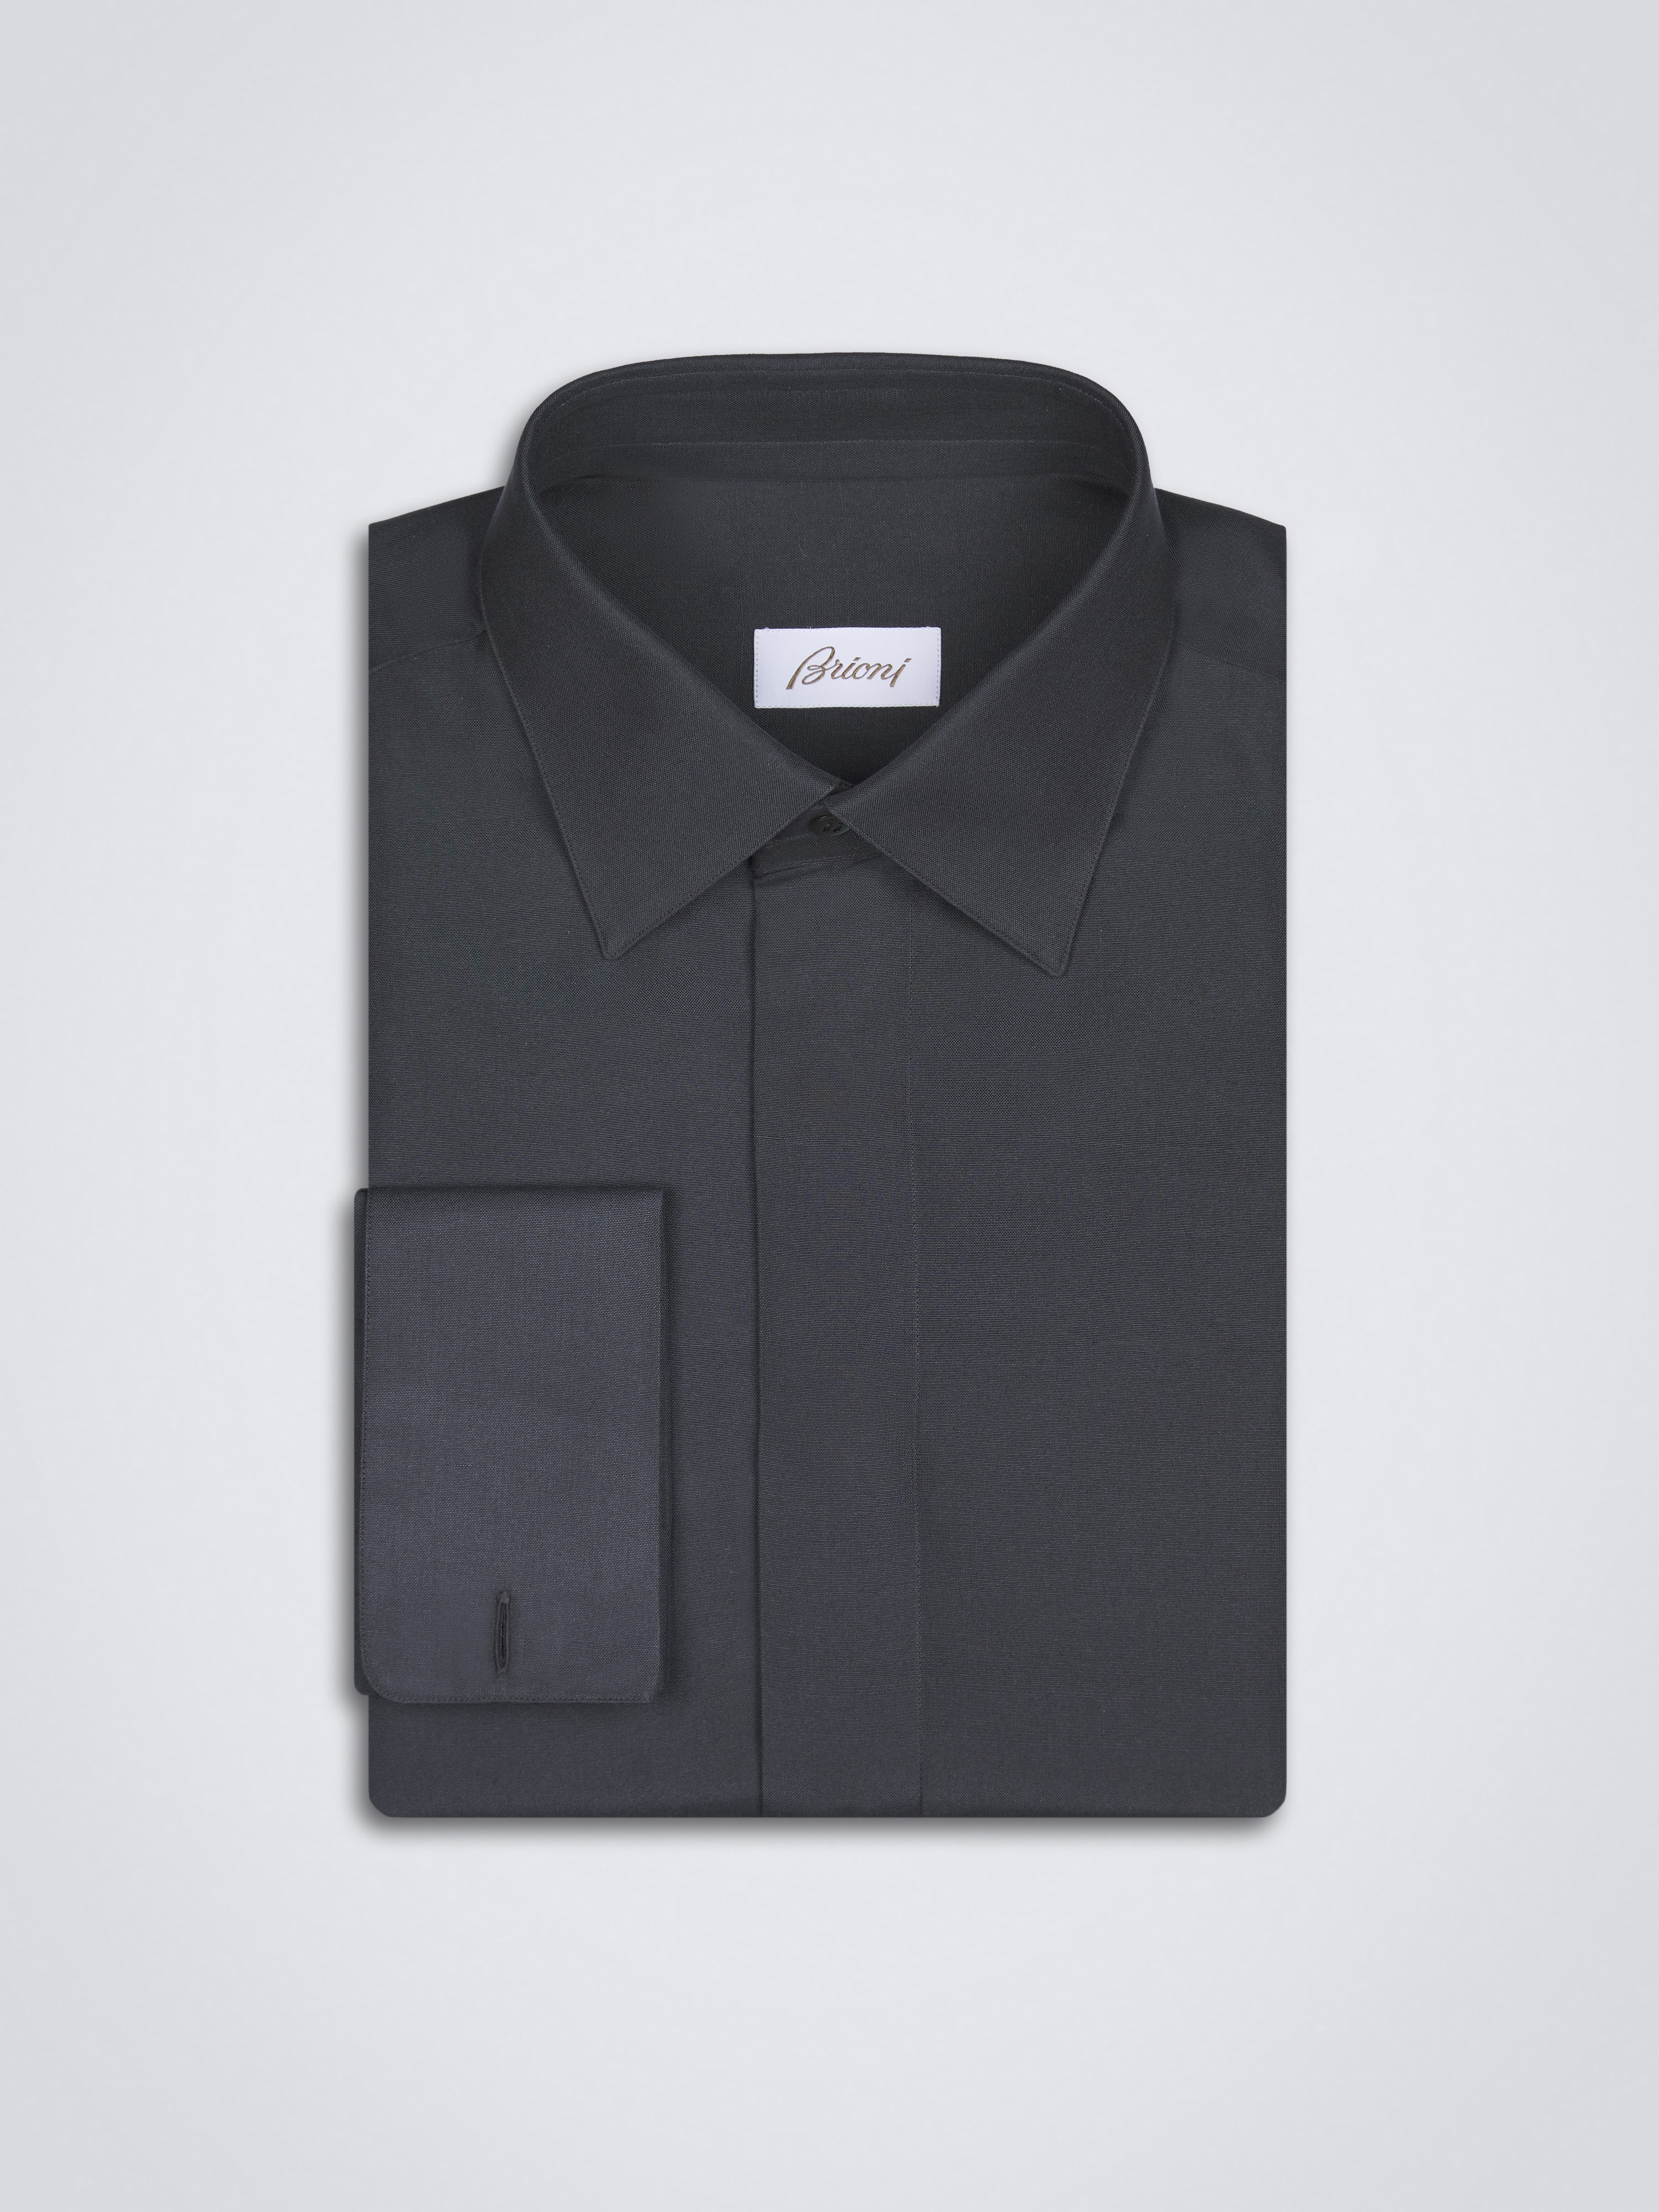 Shirts | Brioni® US Official Store